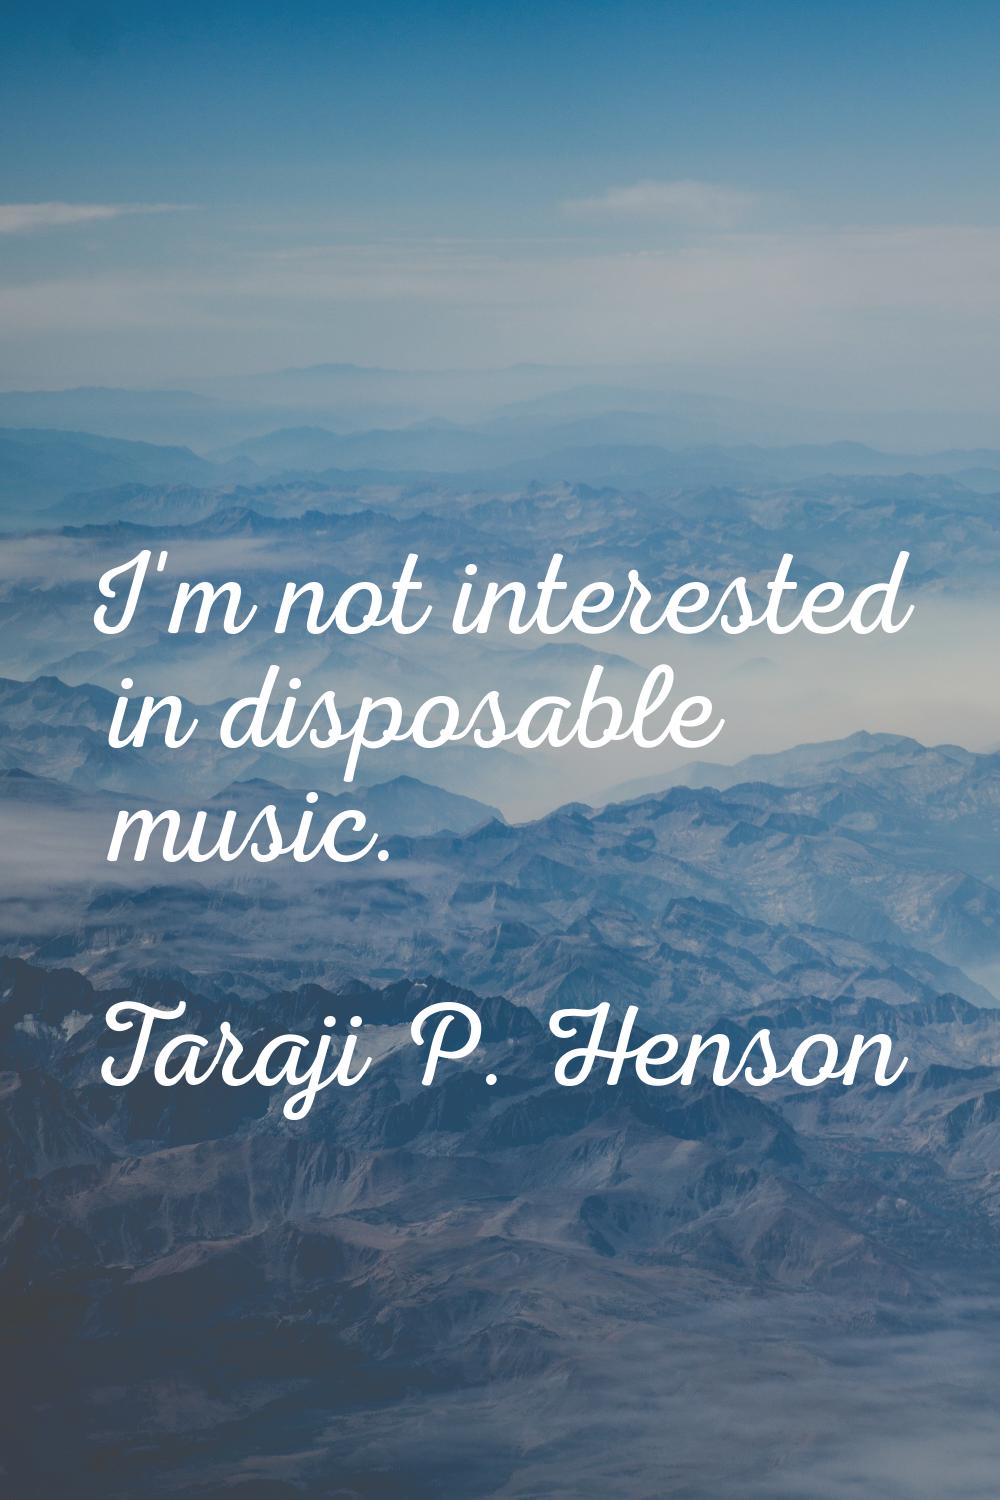 I'm not interested in disposable music.